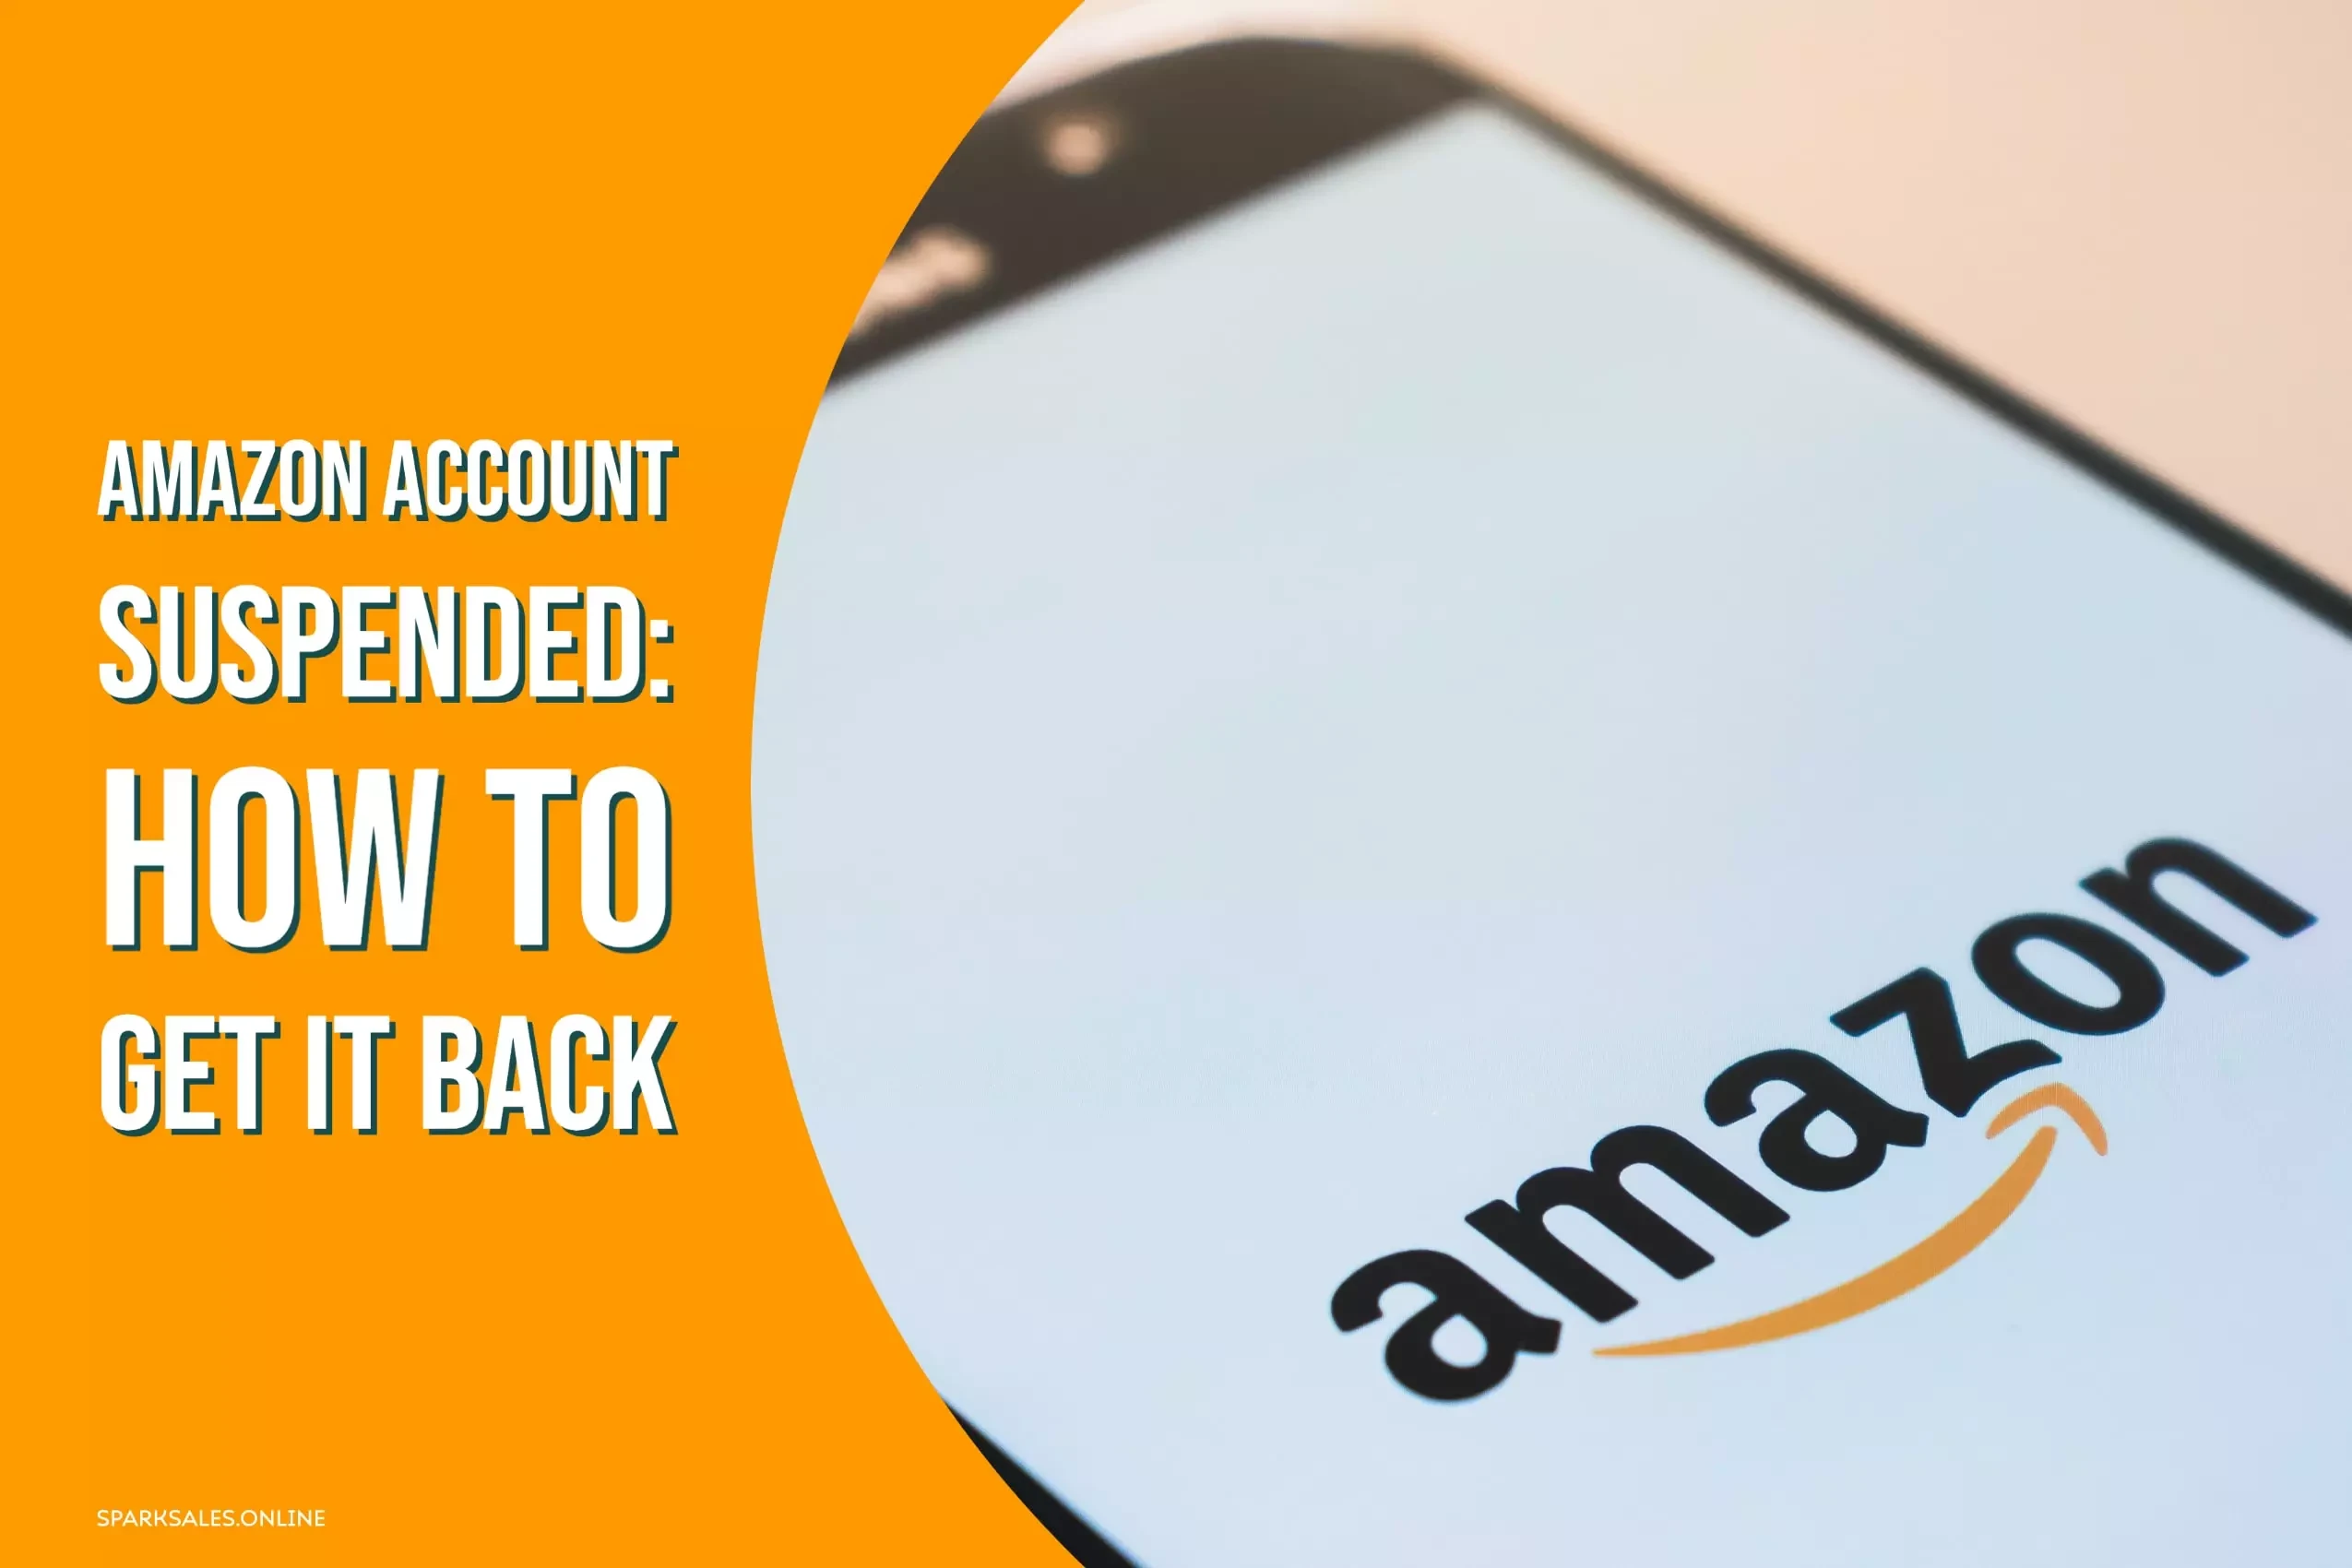 Amazon Account Suspended: How To Get It Back